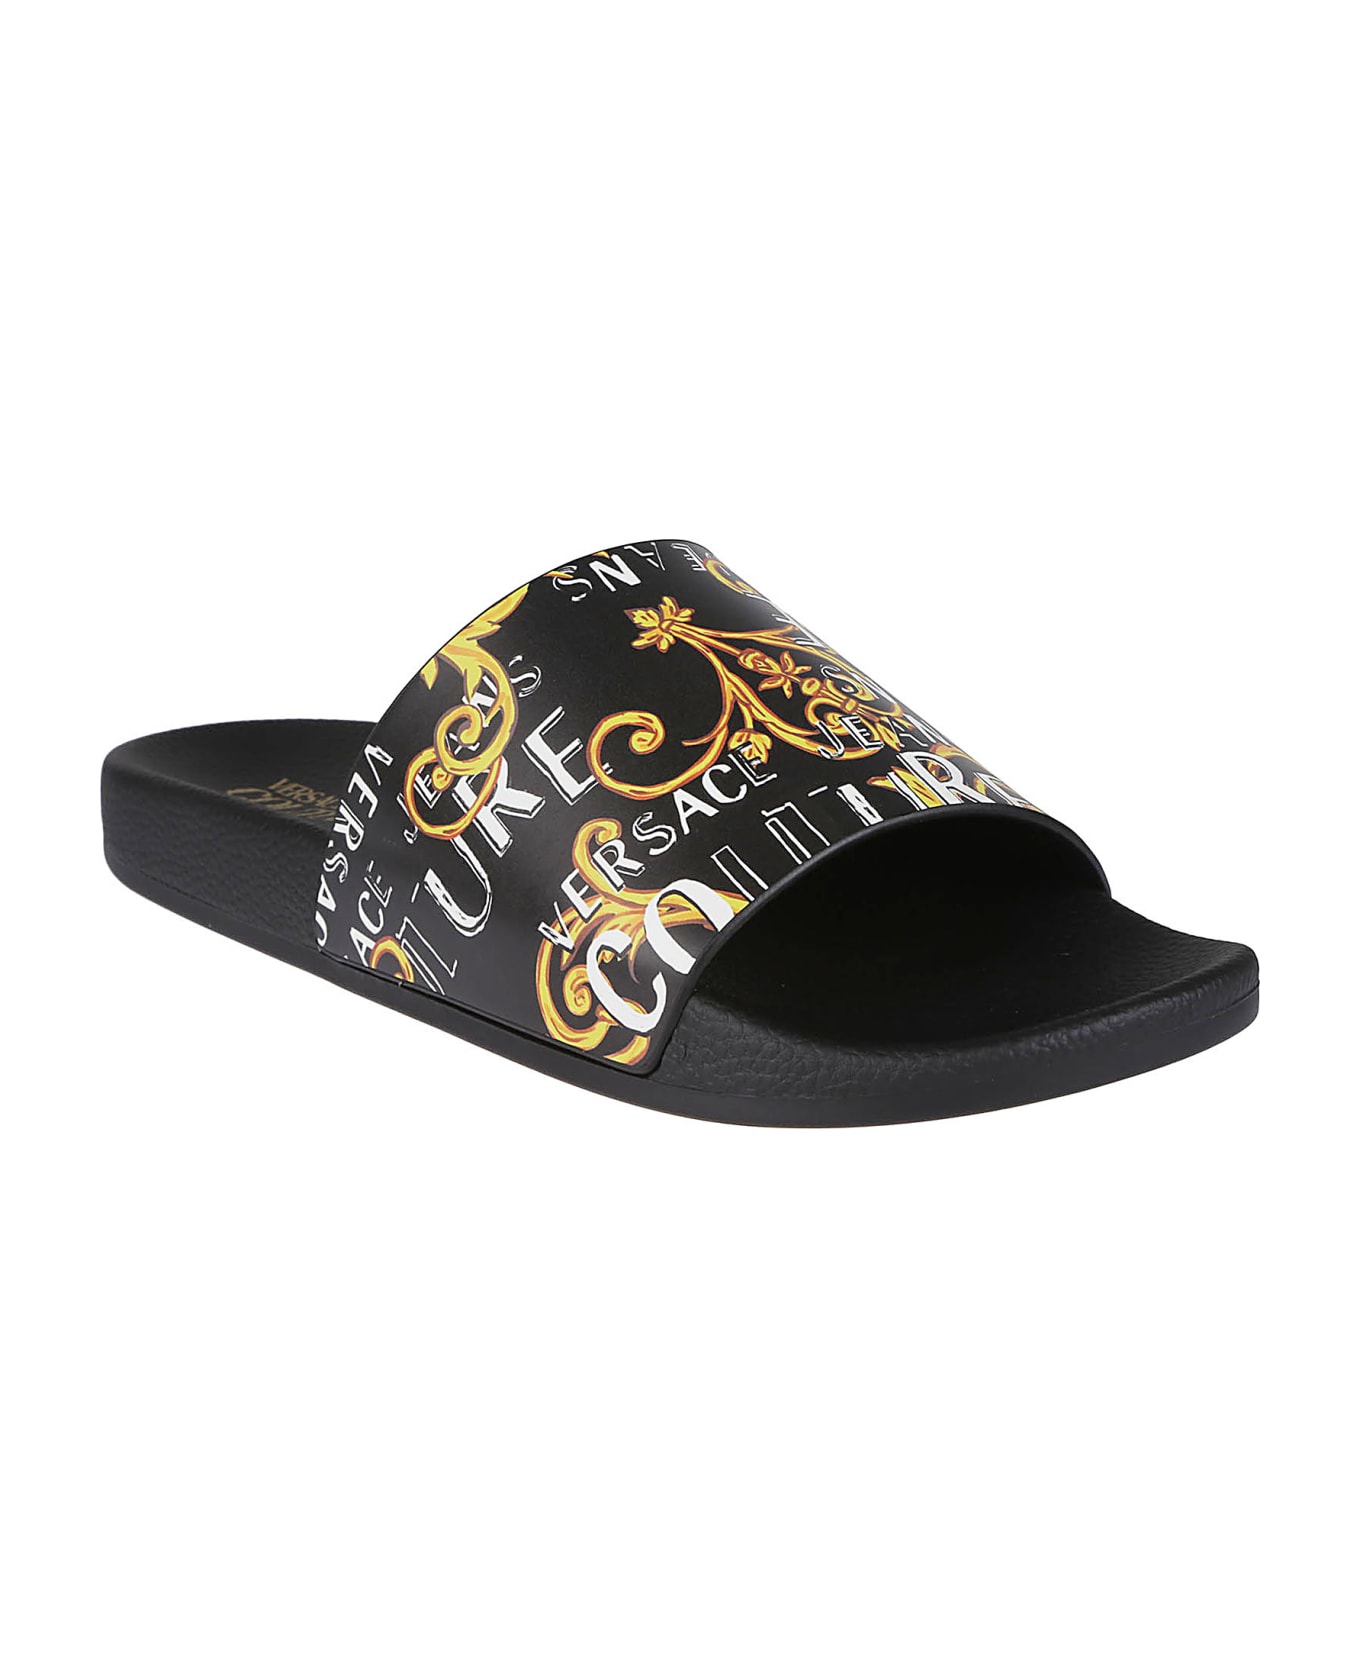 Versace Jeans Couture Gummy 38 Sliders - Black/gold